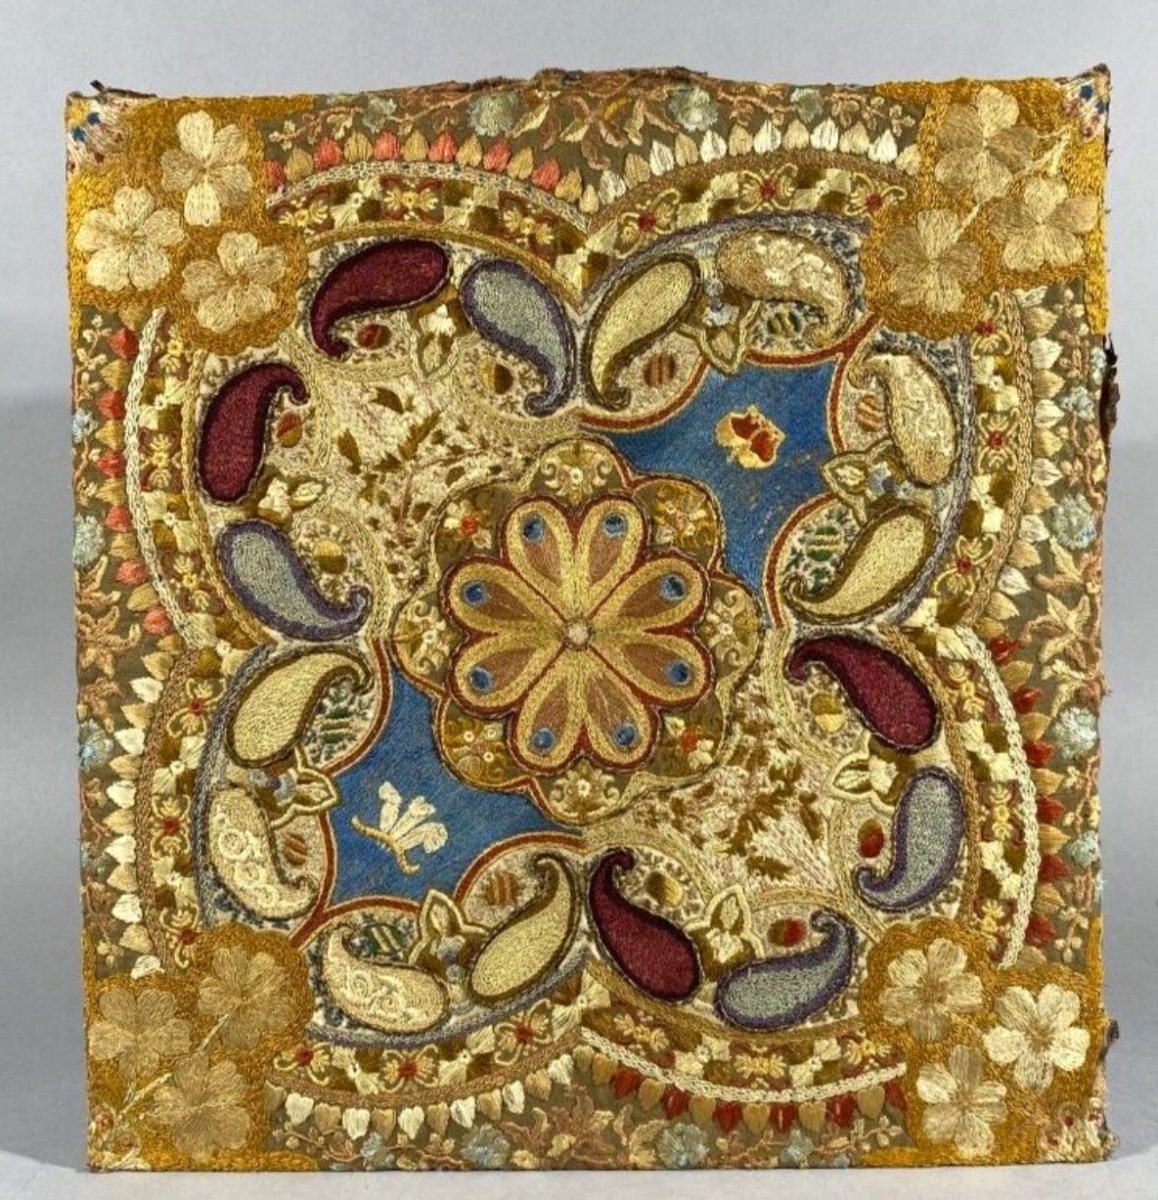 Embroidery, Decorated With The Plumet Of The Prince Of Wales And The Imperial Crown. Late 19th Century